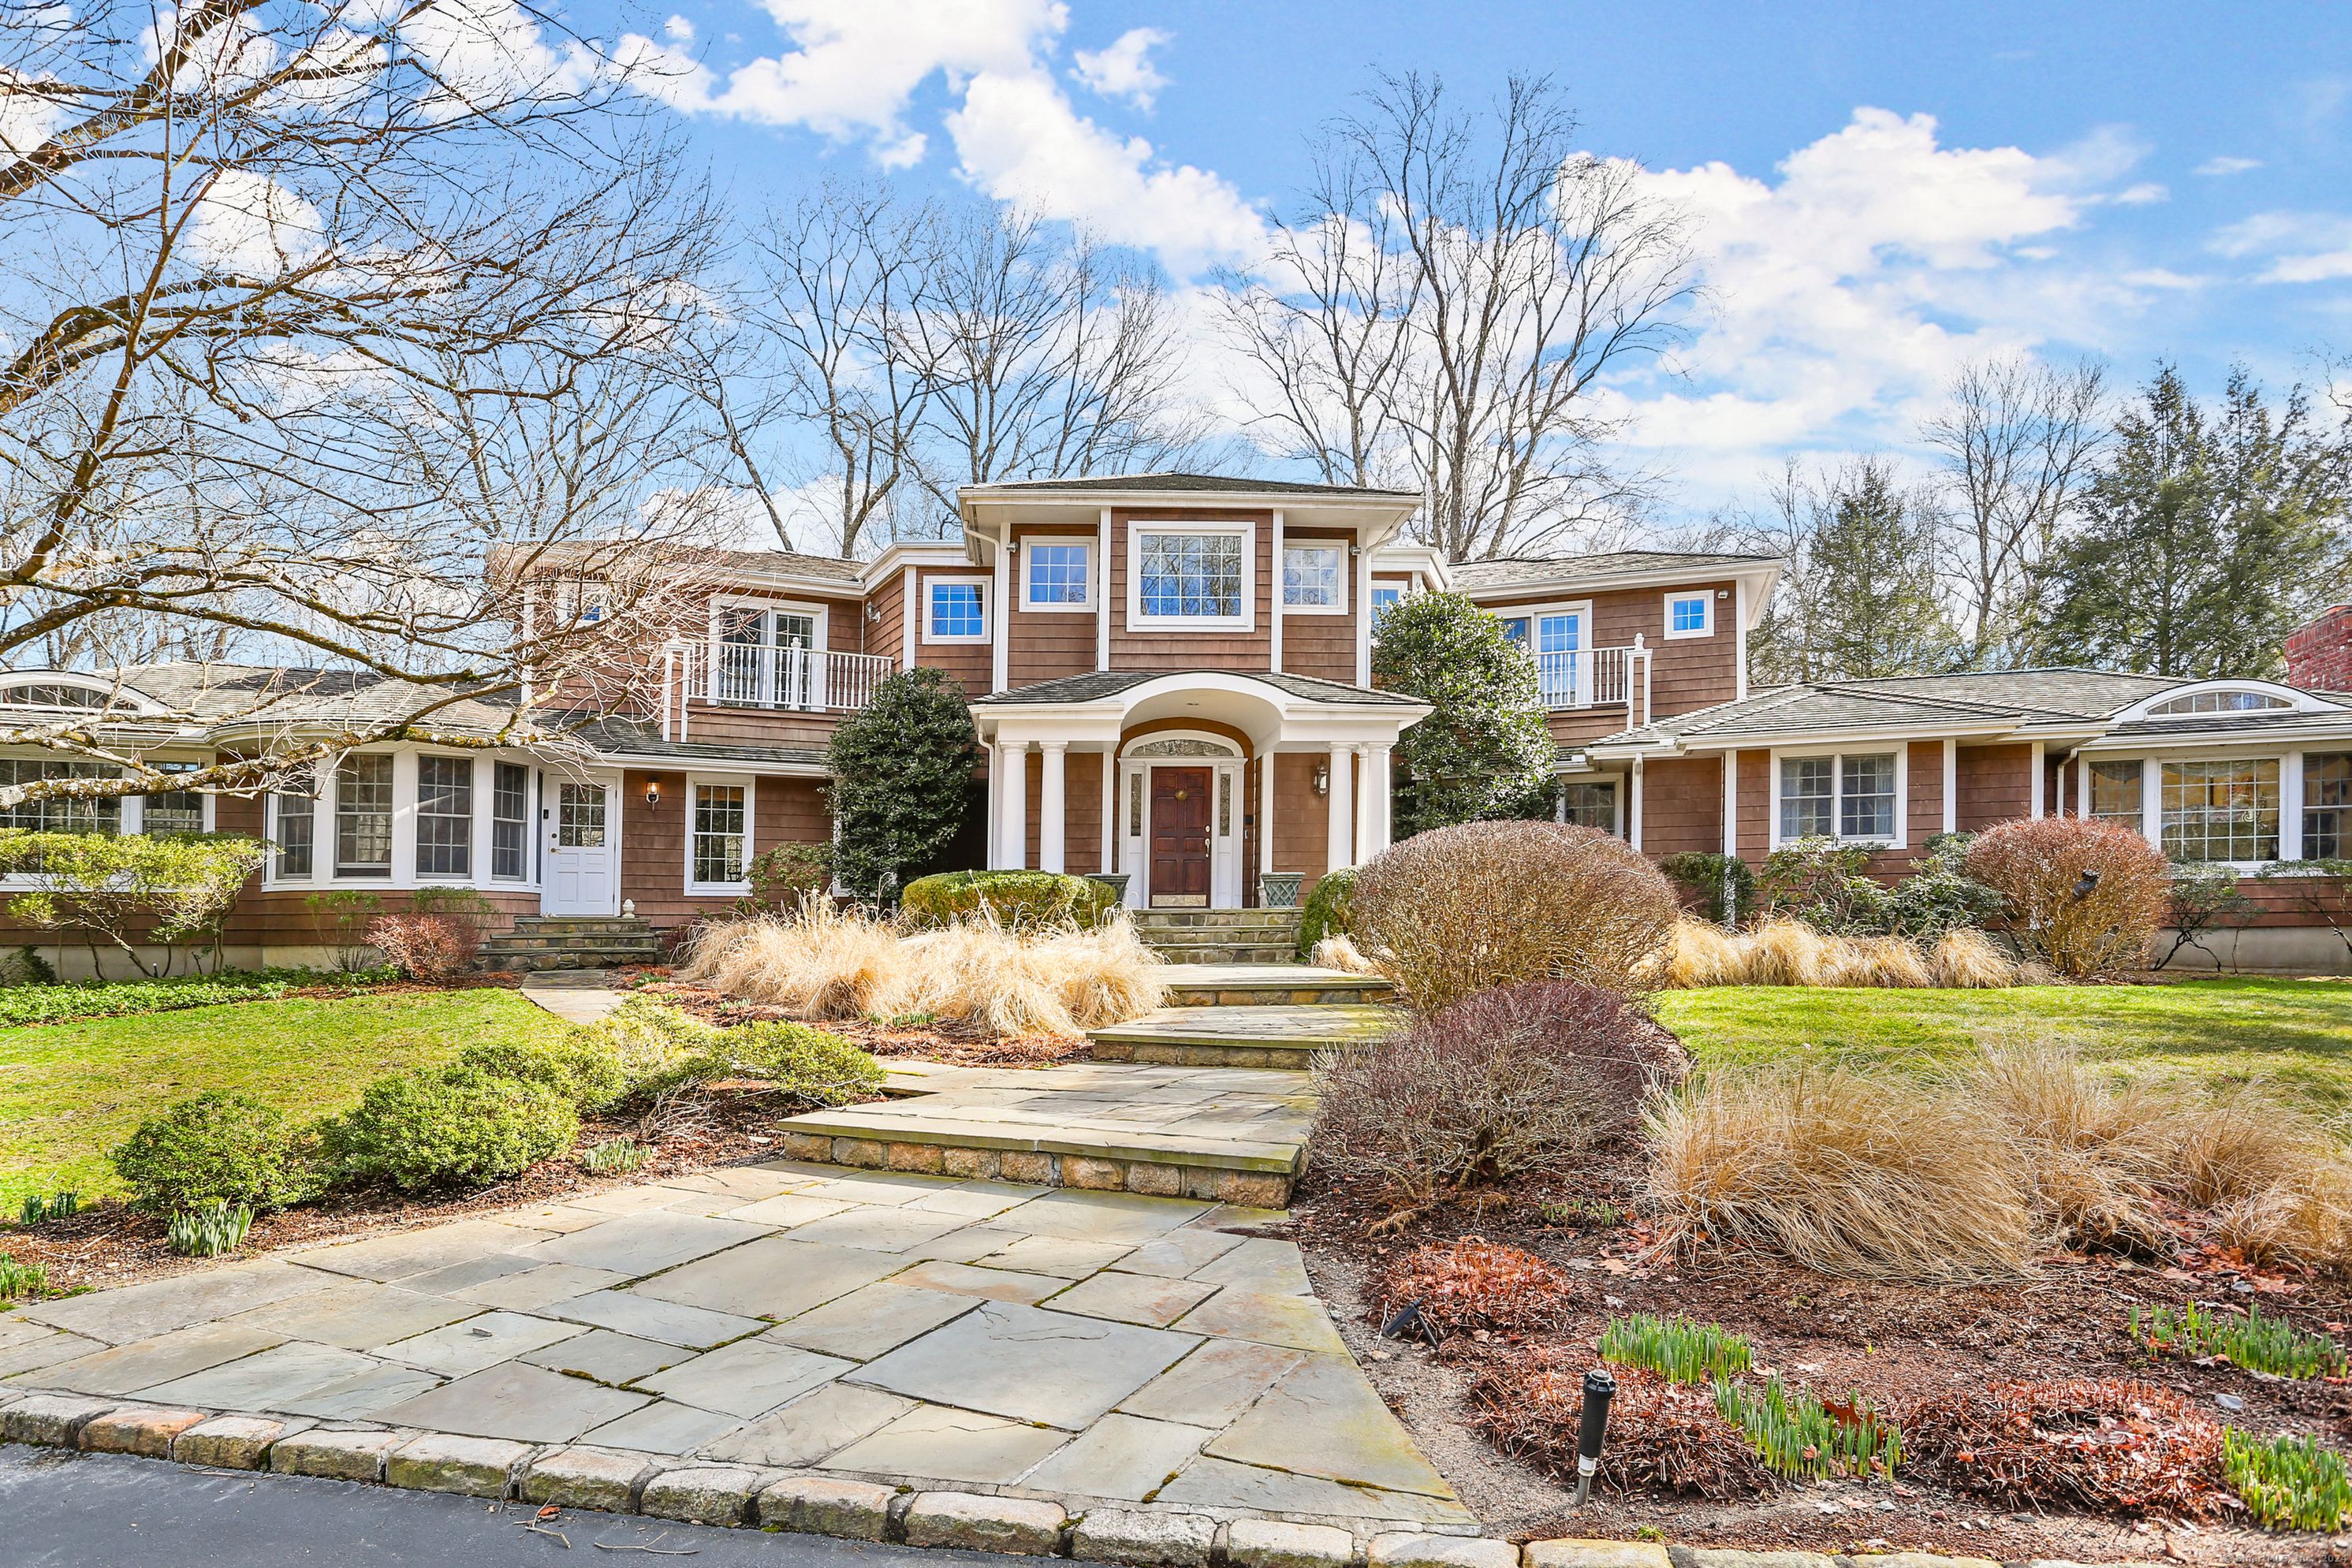 41 Lake Wind Road, New Canaan, Connecticut - 5 Bedrooms  
6 Bathrooms  
11 Rooms - 